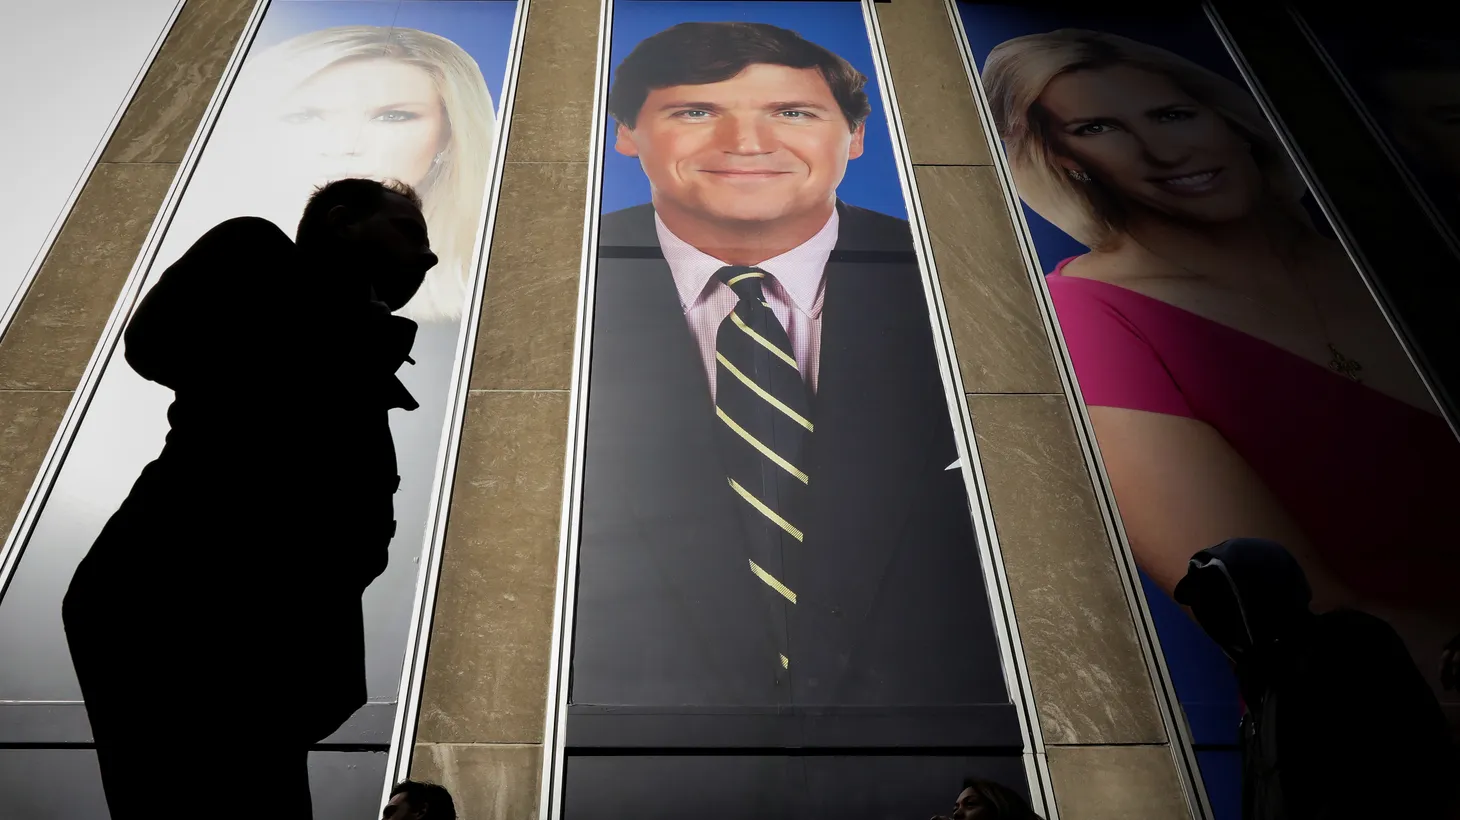 People pass by a promo of Fox News host Tucker Carlson on the News Corporation building in New York, U.S., March 13, 2019.